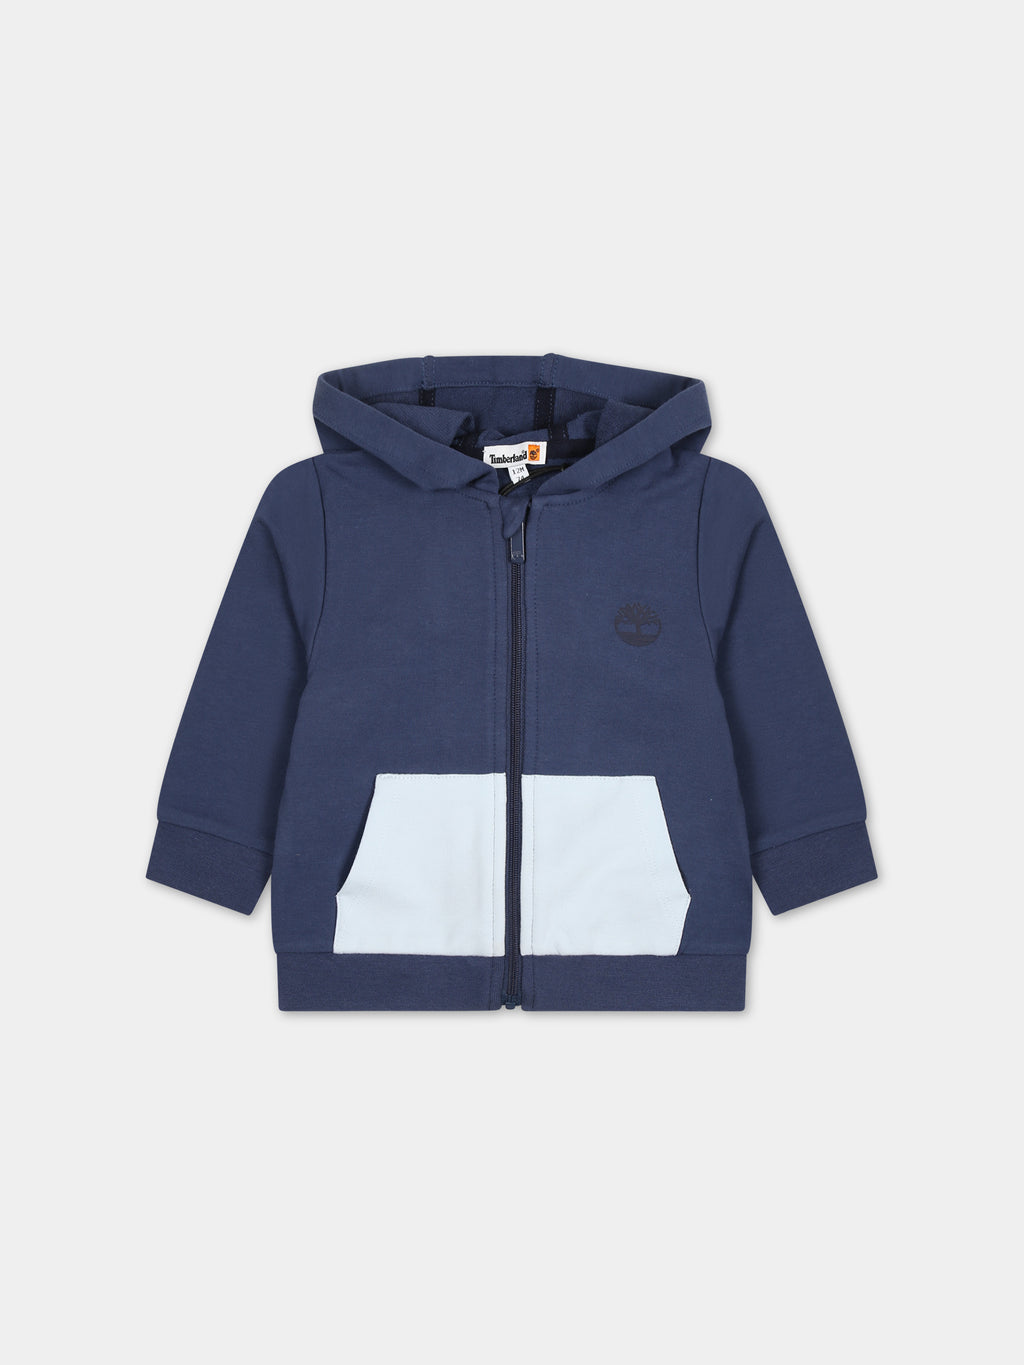 Blue hooded sweatshirt for baby boy with logo